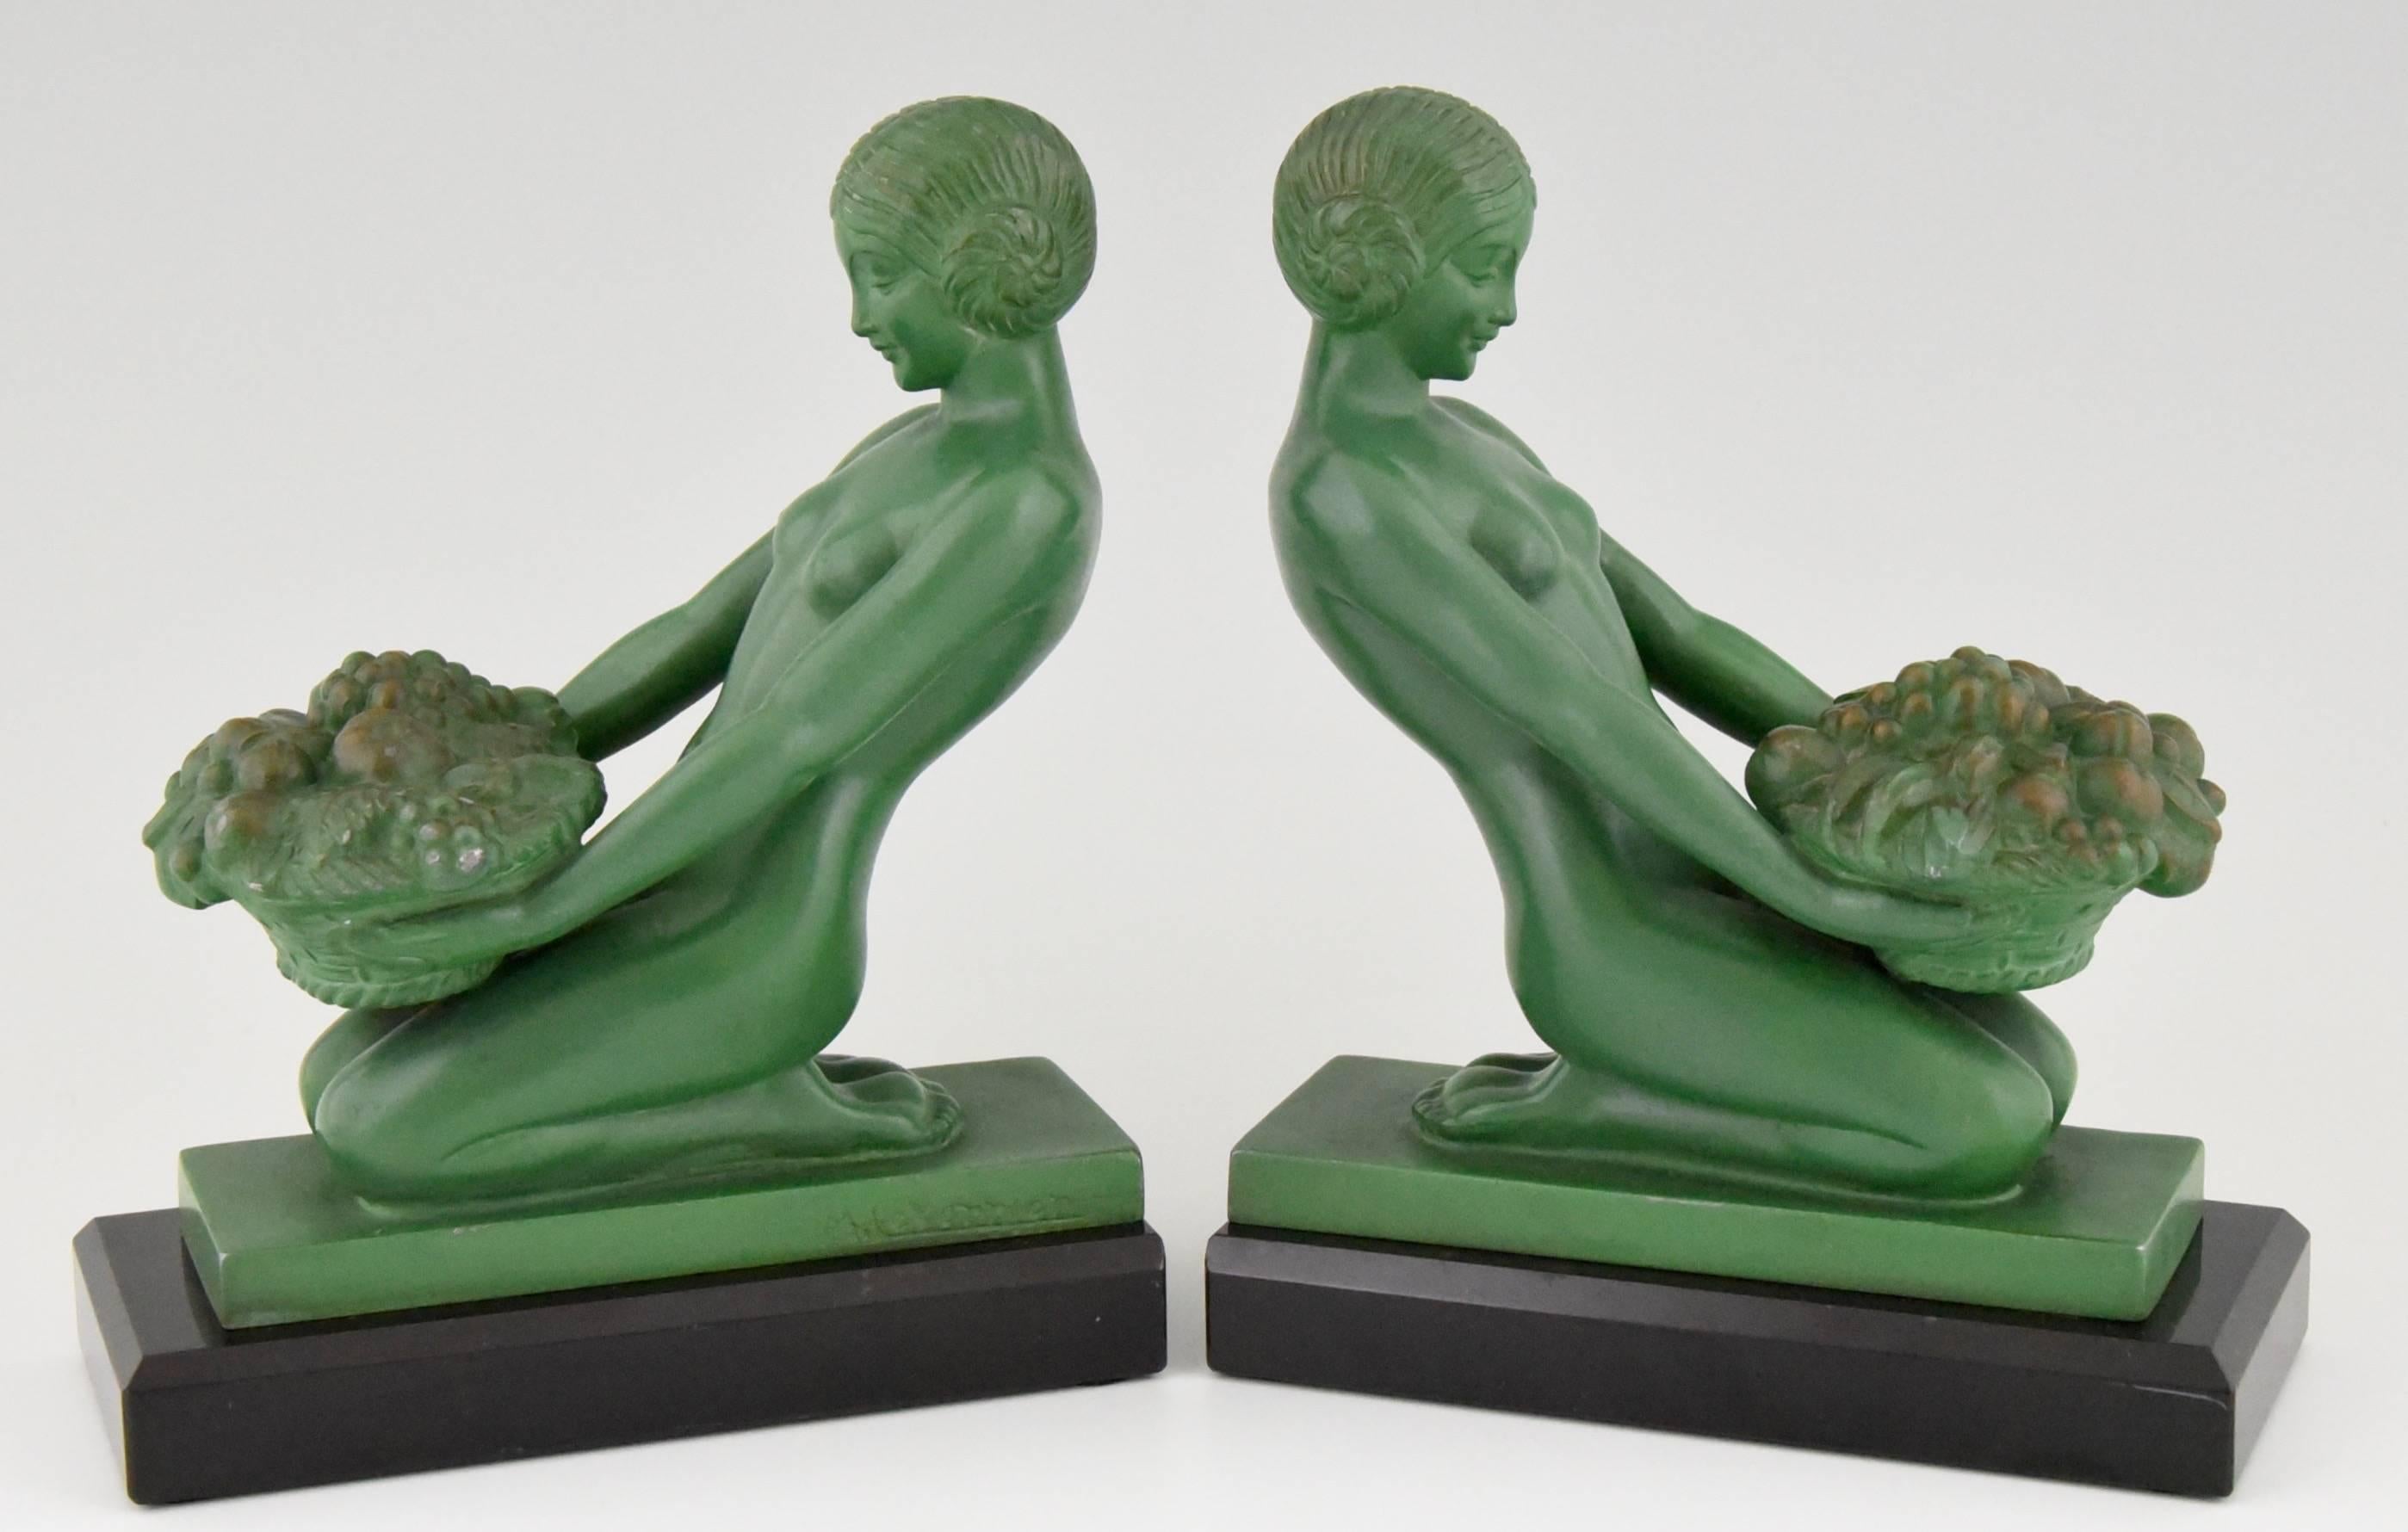 A pair of Art Deco bookends with kneeling nudes holding baskets full of fruit. 

Artist / Makera.
Max Le Verrier. 

Signature / Marks: 
M. Le Verrier. 

Style:
Art Deco.

Date:
1930.

Material: 
Green patinated metal.
Black marble